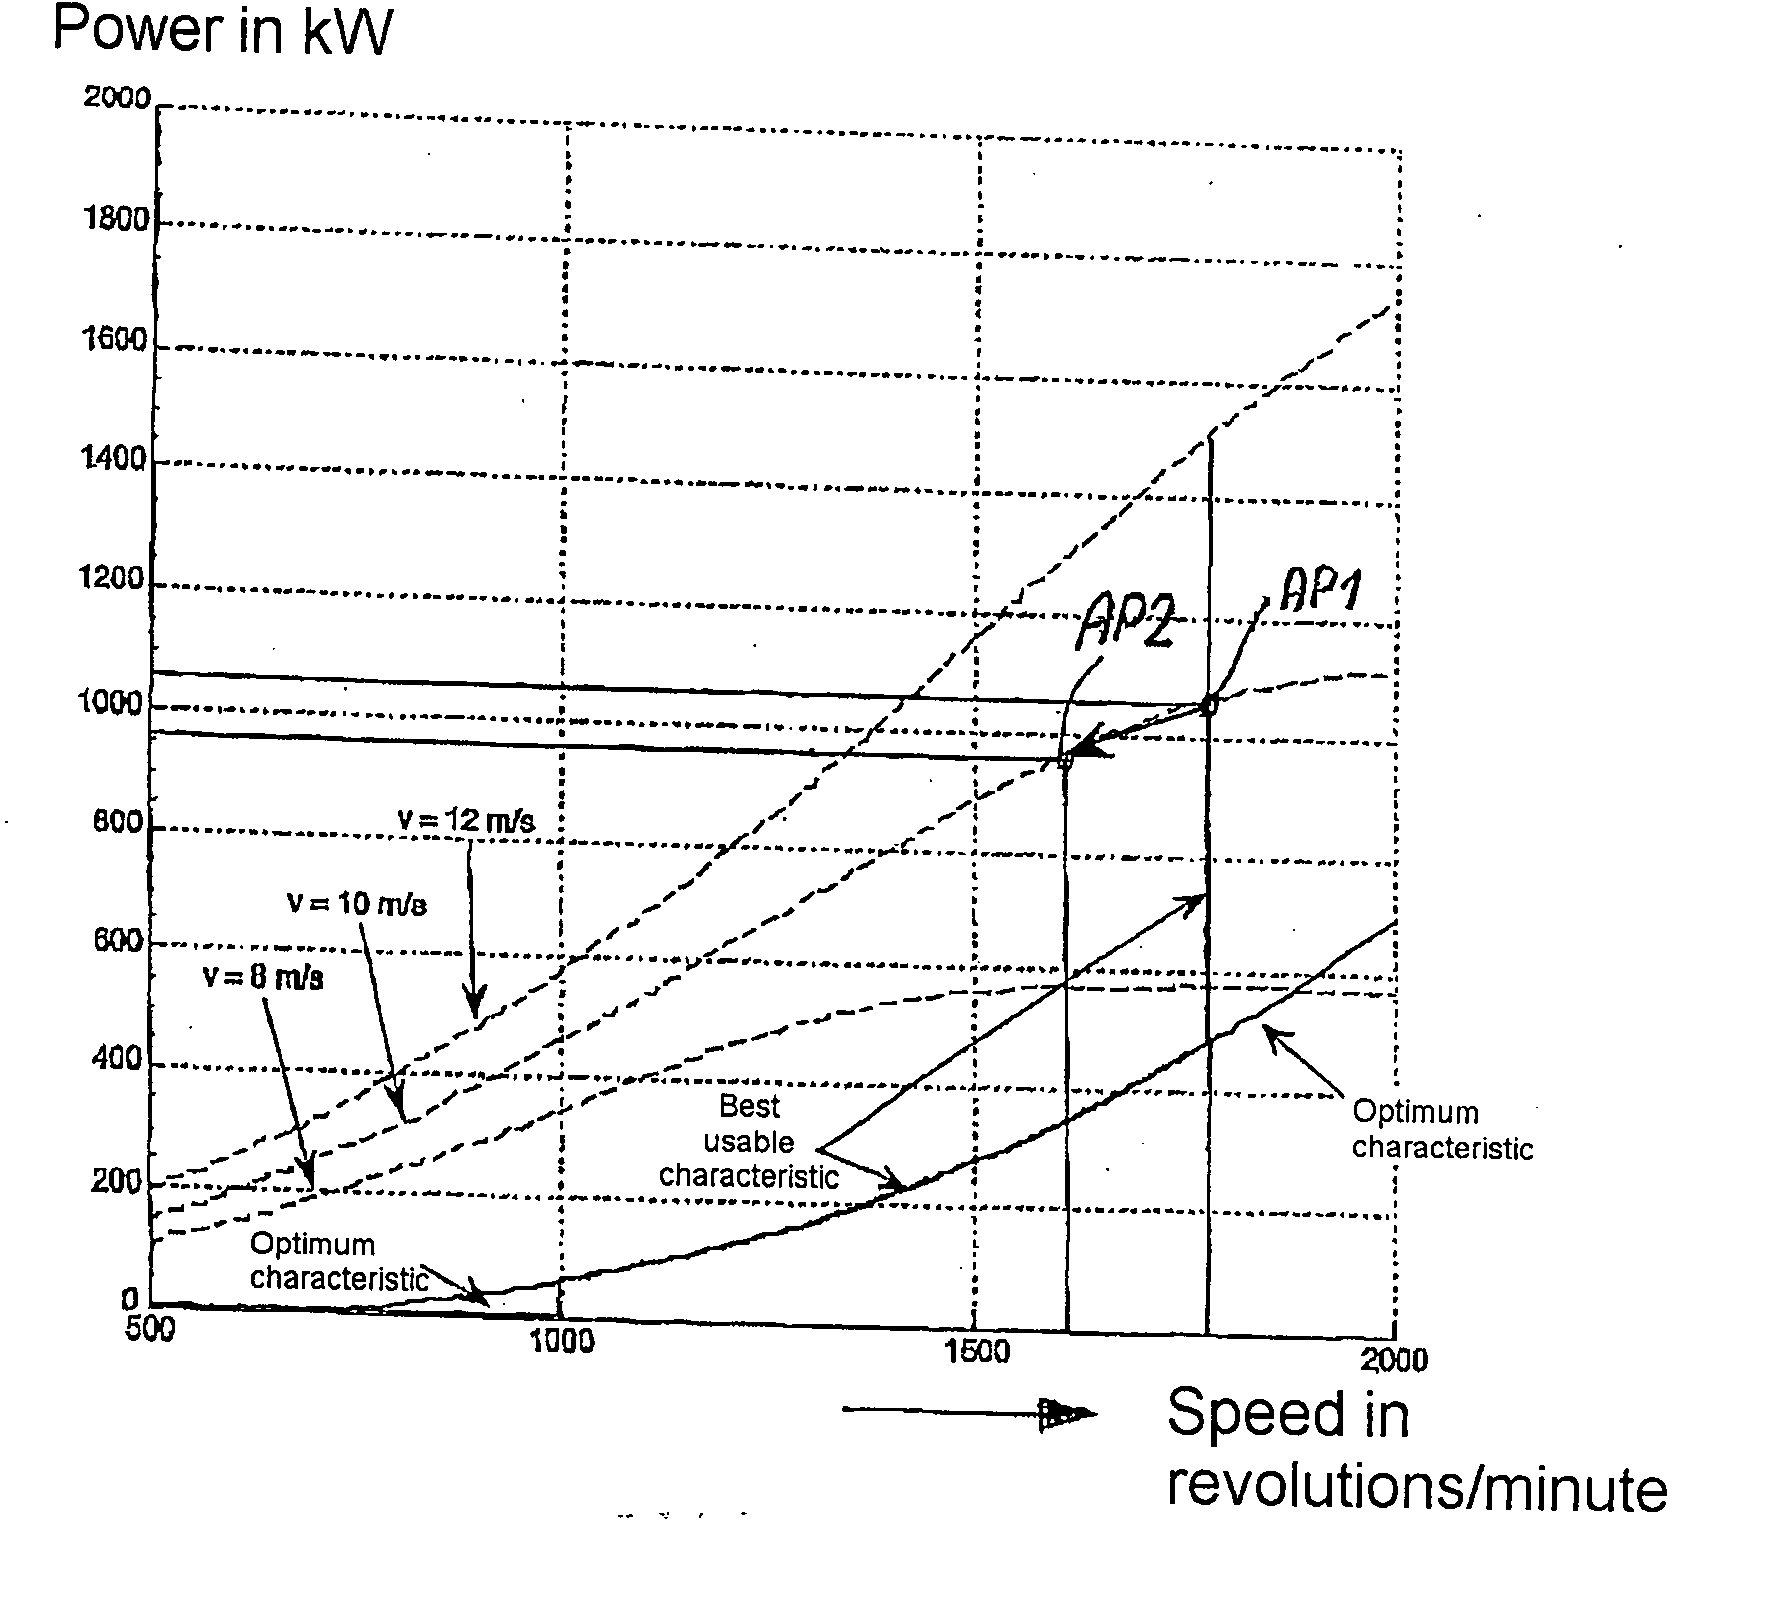 Method for operating or controlling a wind turbine and method for providing primary control power by means of wind turbines